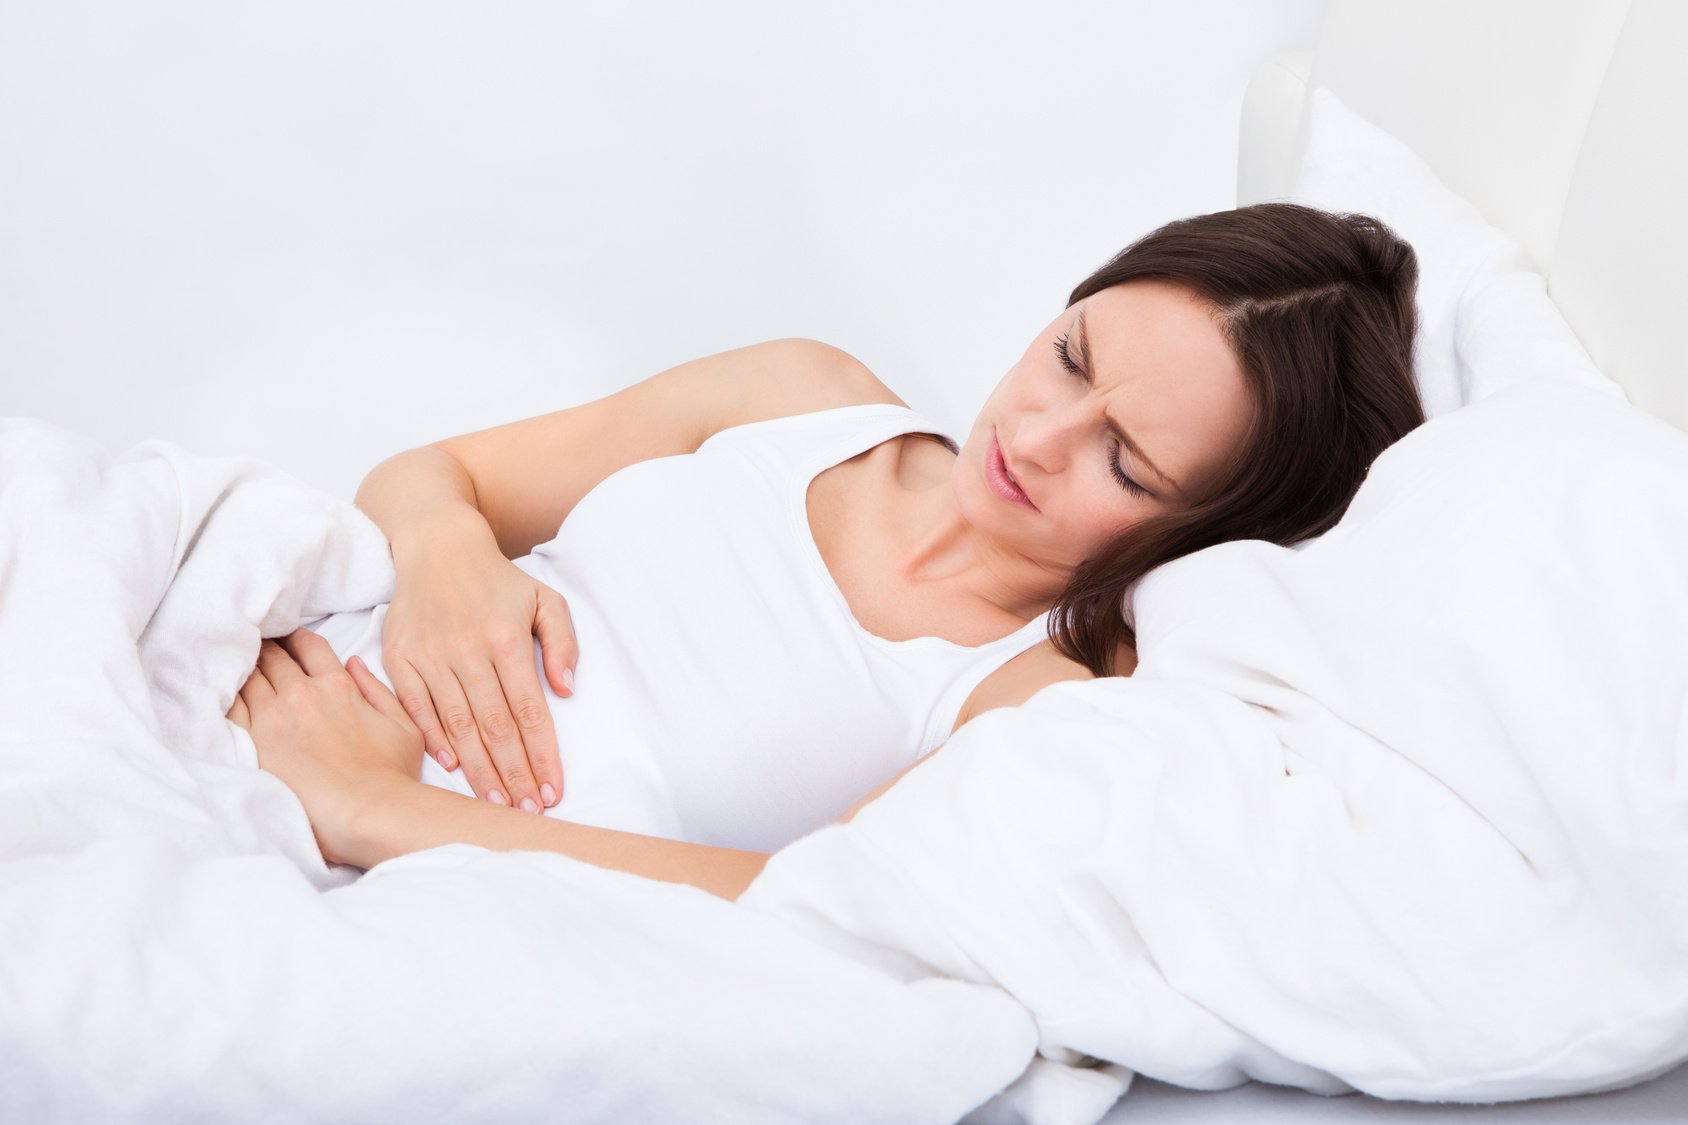 Woman with stomach ache lying on bed